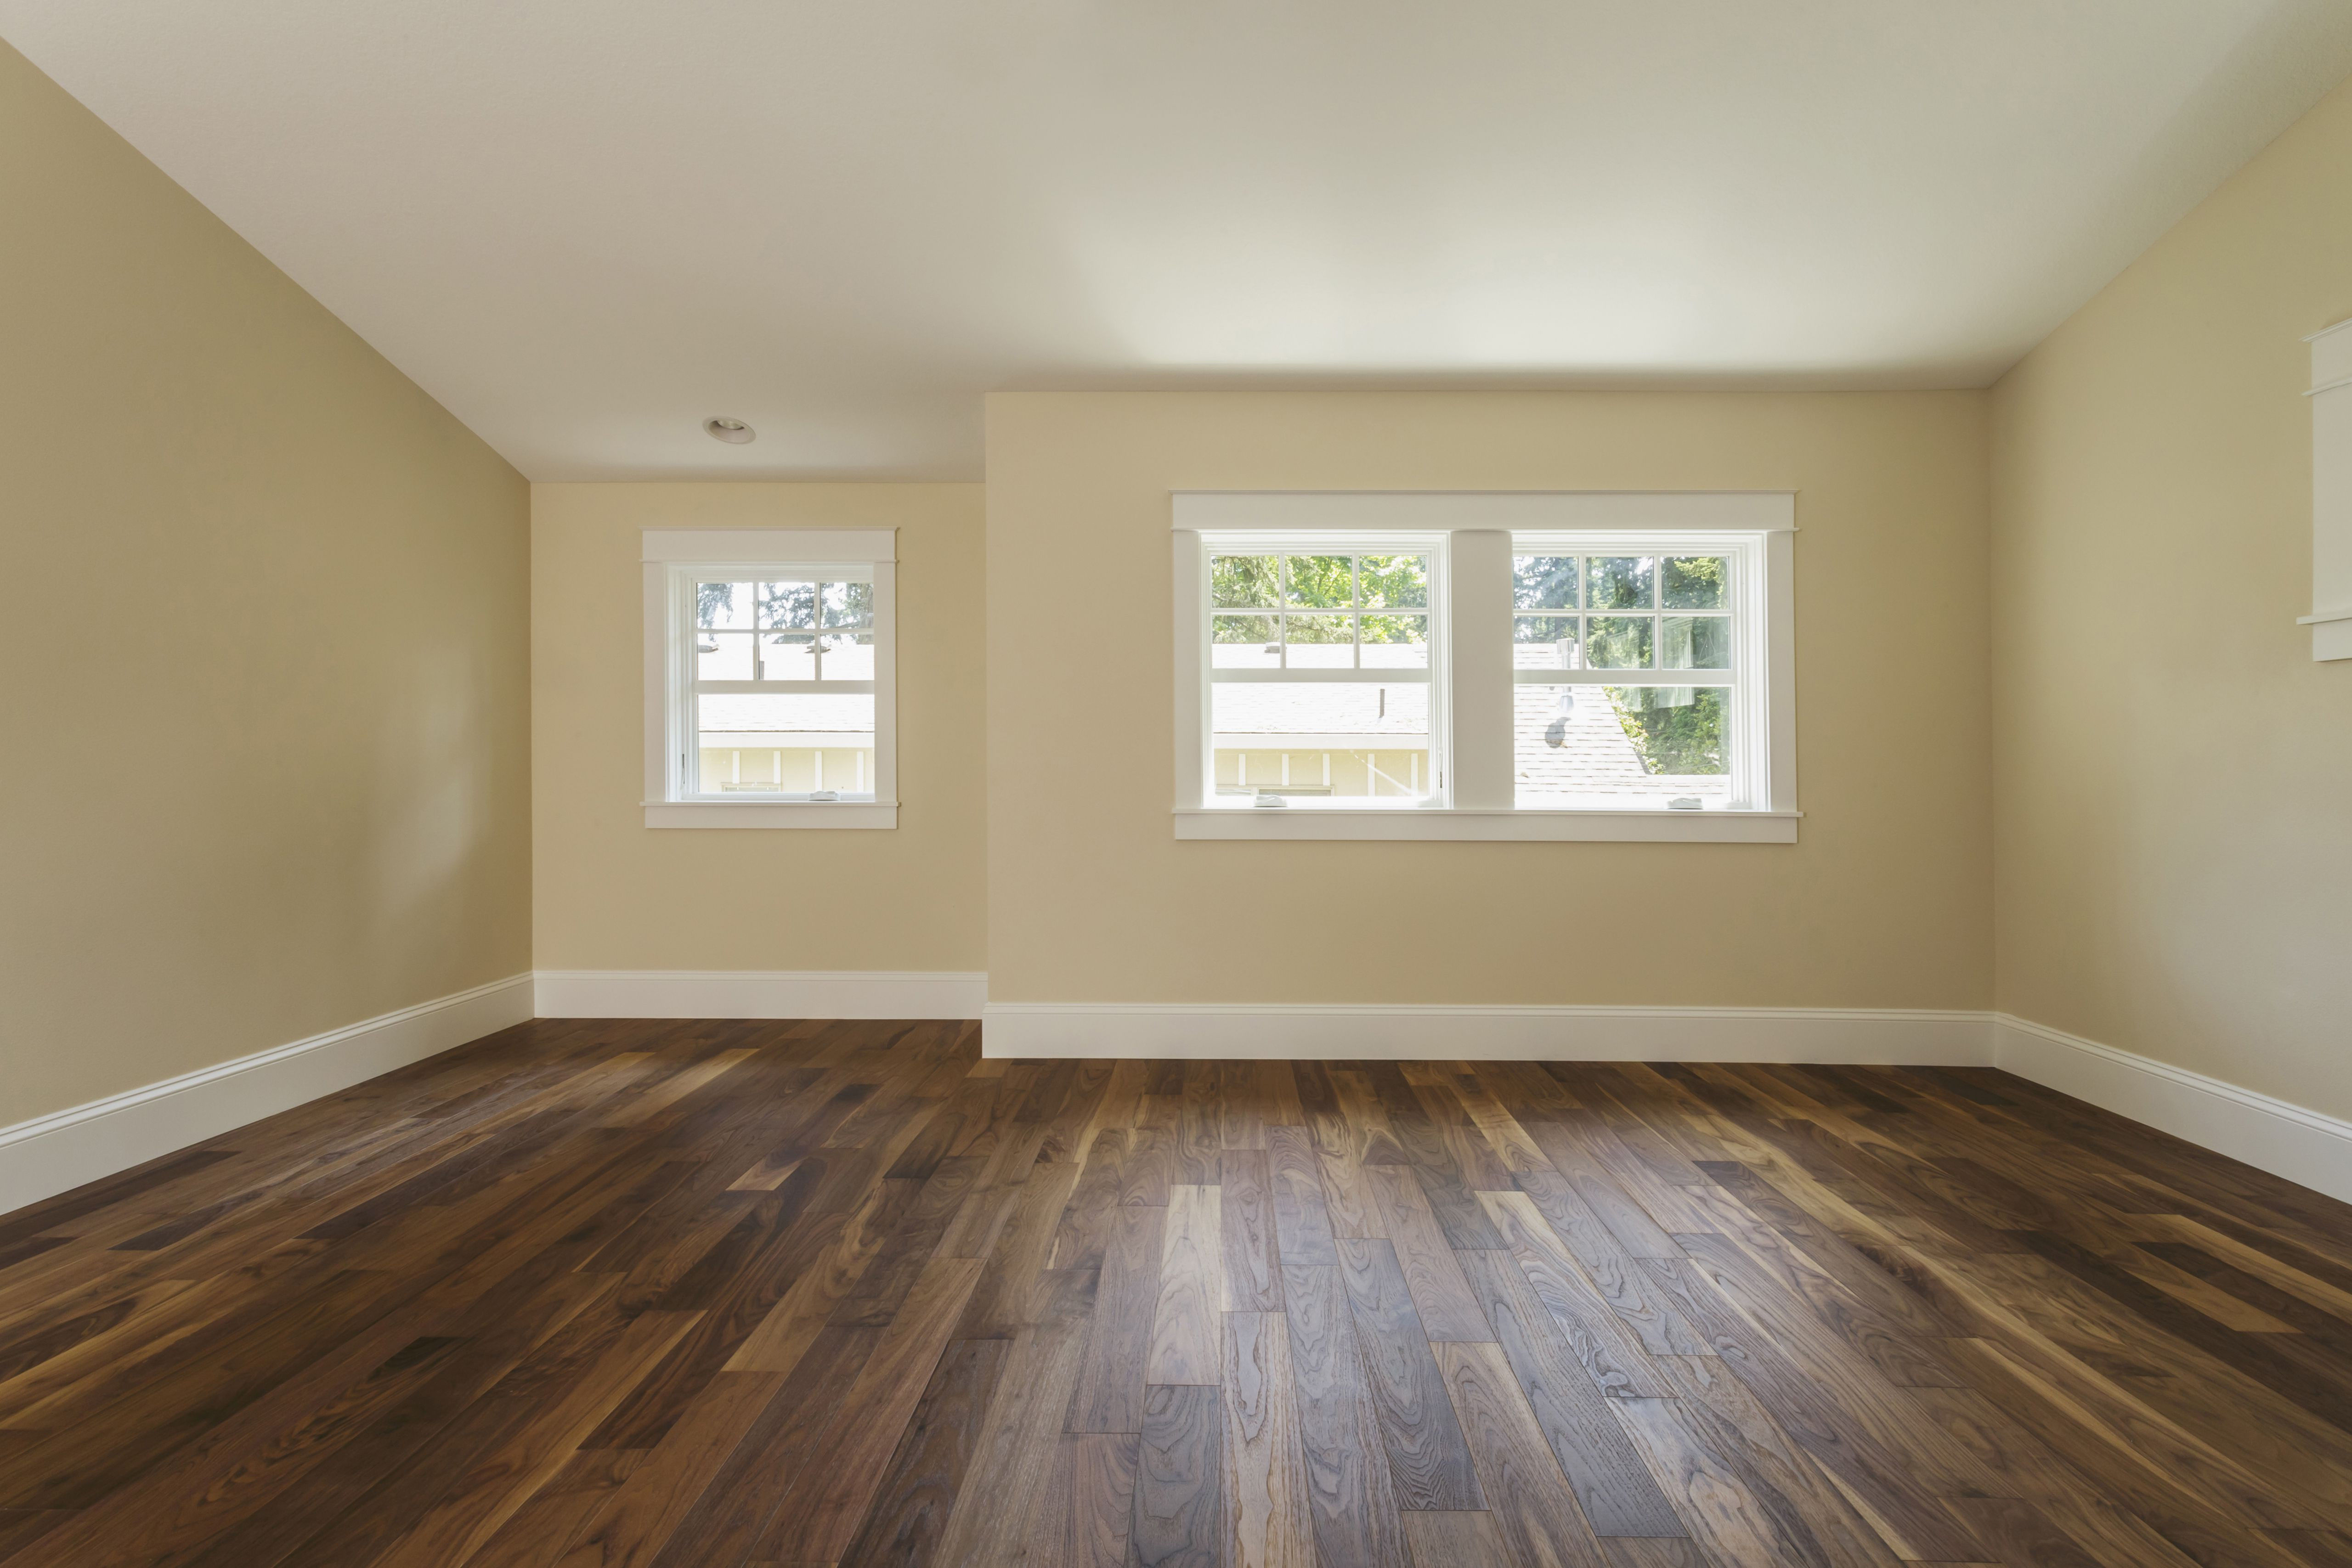 18 Lovable the Correct Direction for Laying Hardwood Floors 2024 free download the correct direction for laying hardwood floors of its easy and fast to install plank vinyl flooring for wooden floor in empty bedroom 482143001 588bd5f45f9b5874eebd56e9